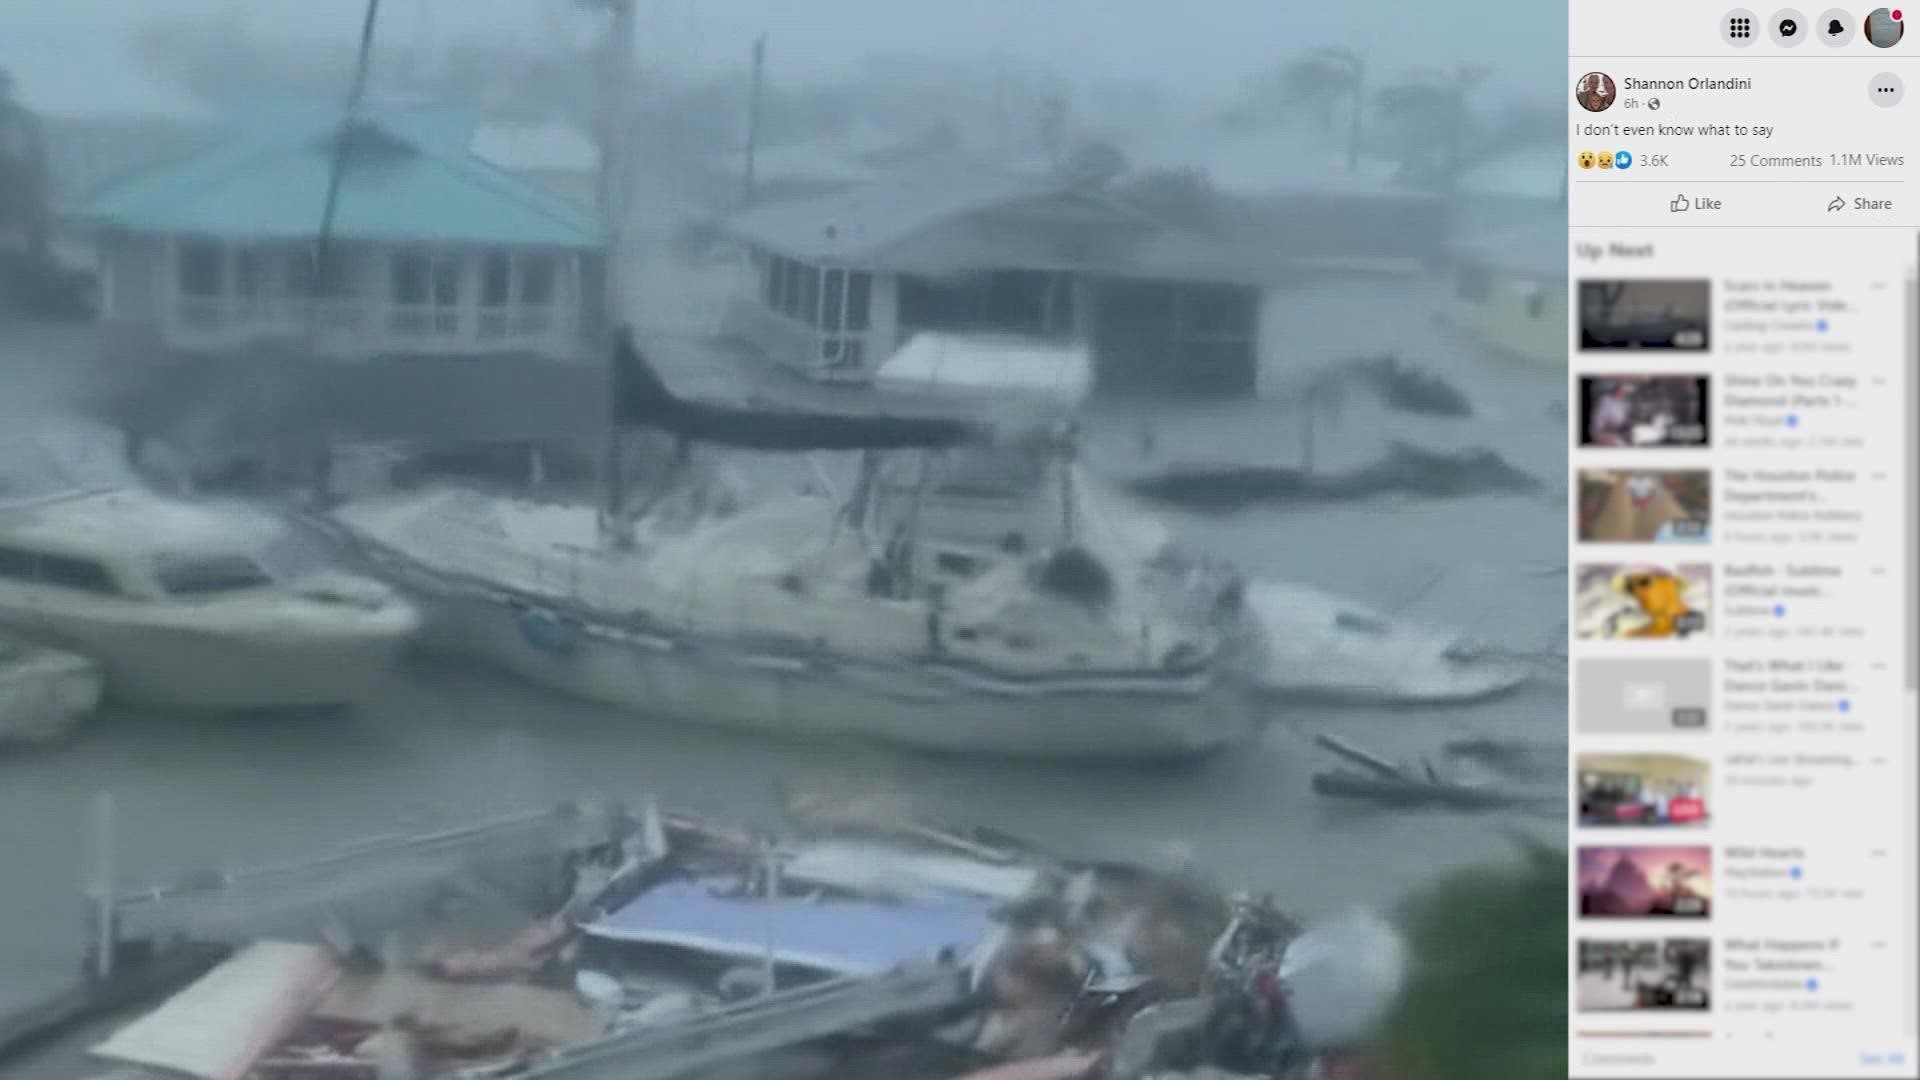 Millions of people are without power after Hurricane Ian causes massive destruction in Florida.